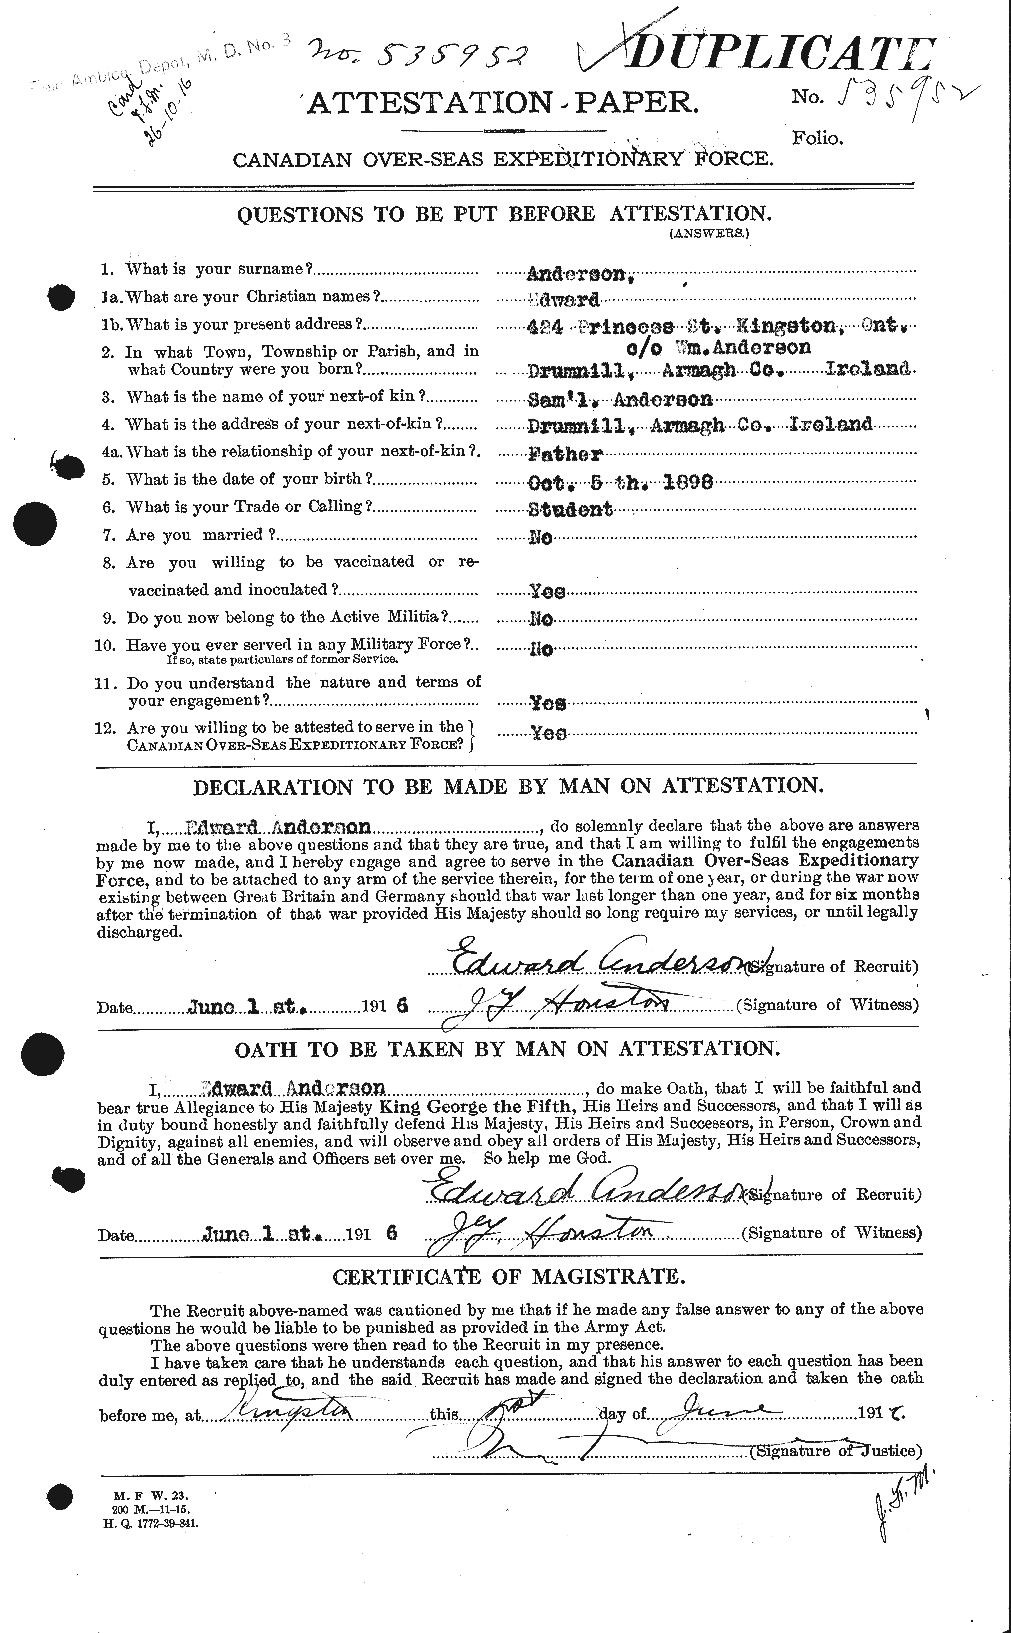 Personnel Records of the First World War - CEF 209944a